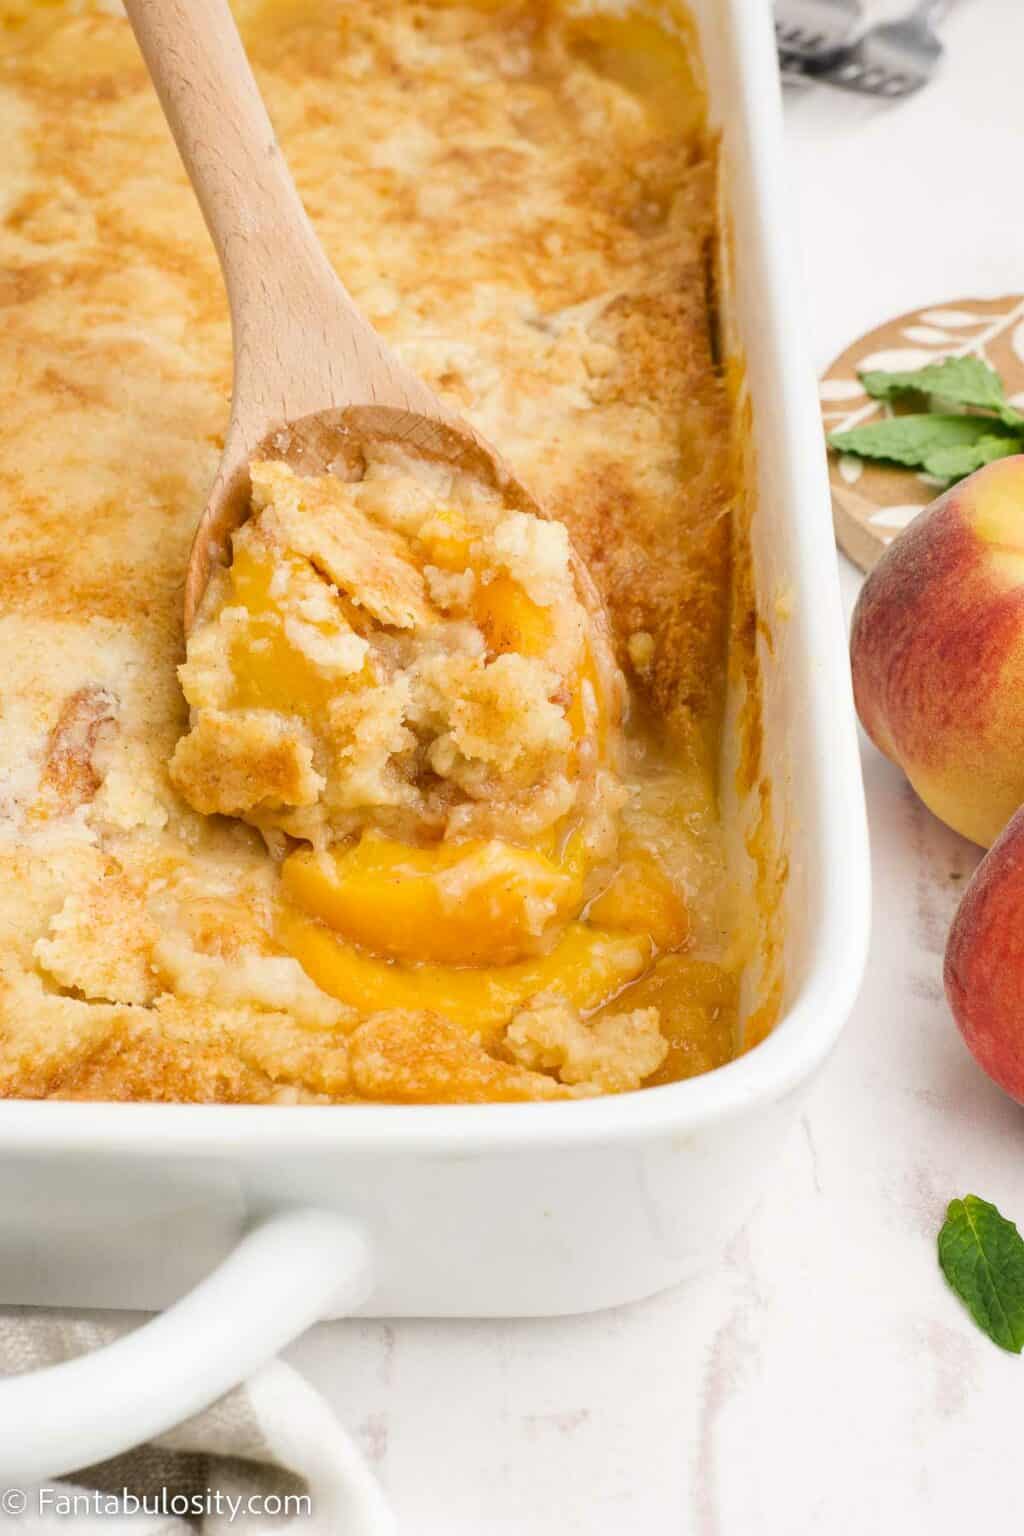 Peach Cobbler with Cake Mix - Fantabulosity